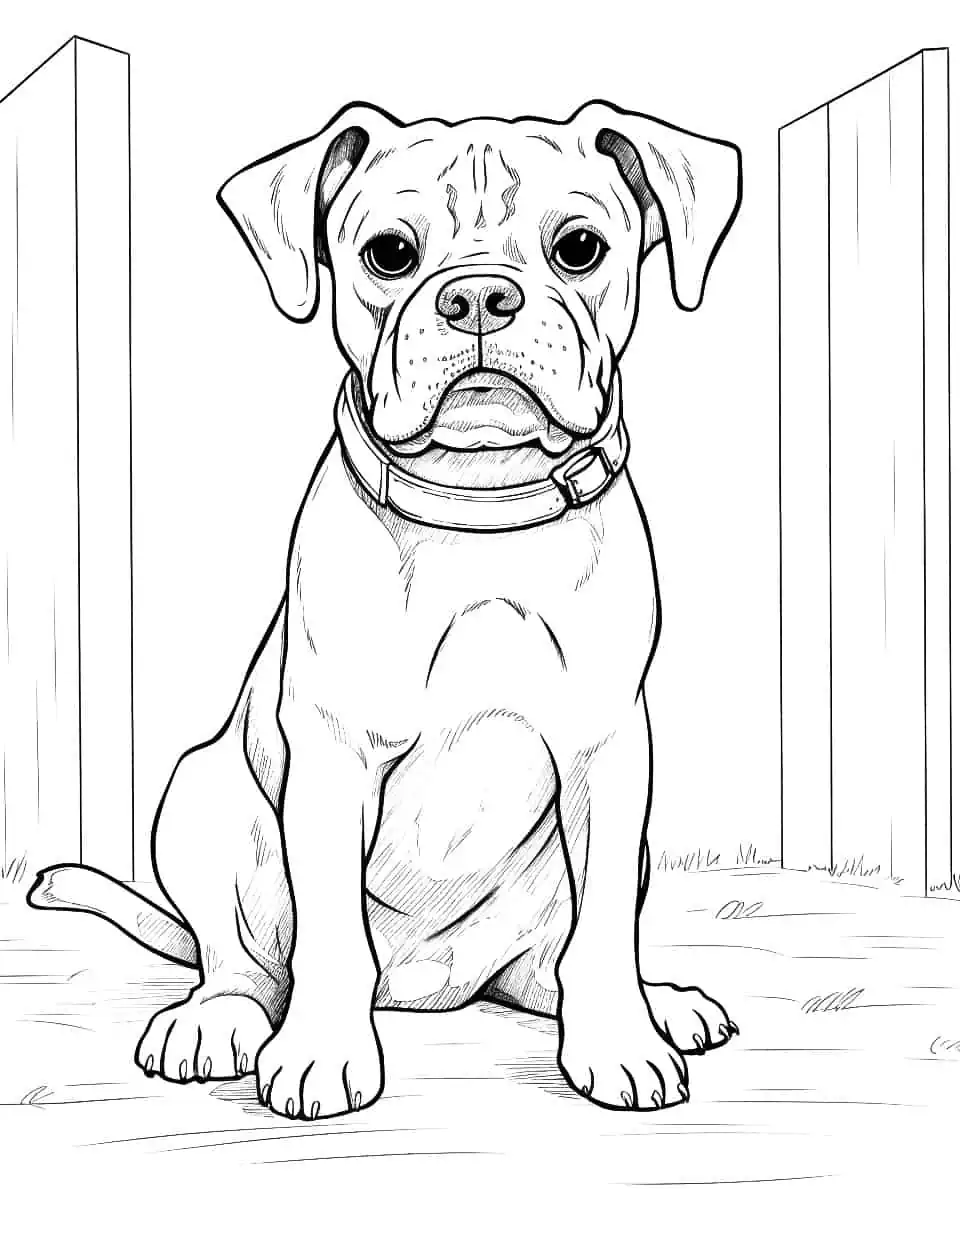 Realistic Boxer Guarding Coloring Page - A detailed, realistic sketch of a Boxer dog guarding its home.